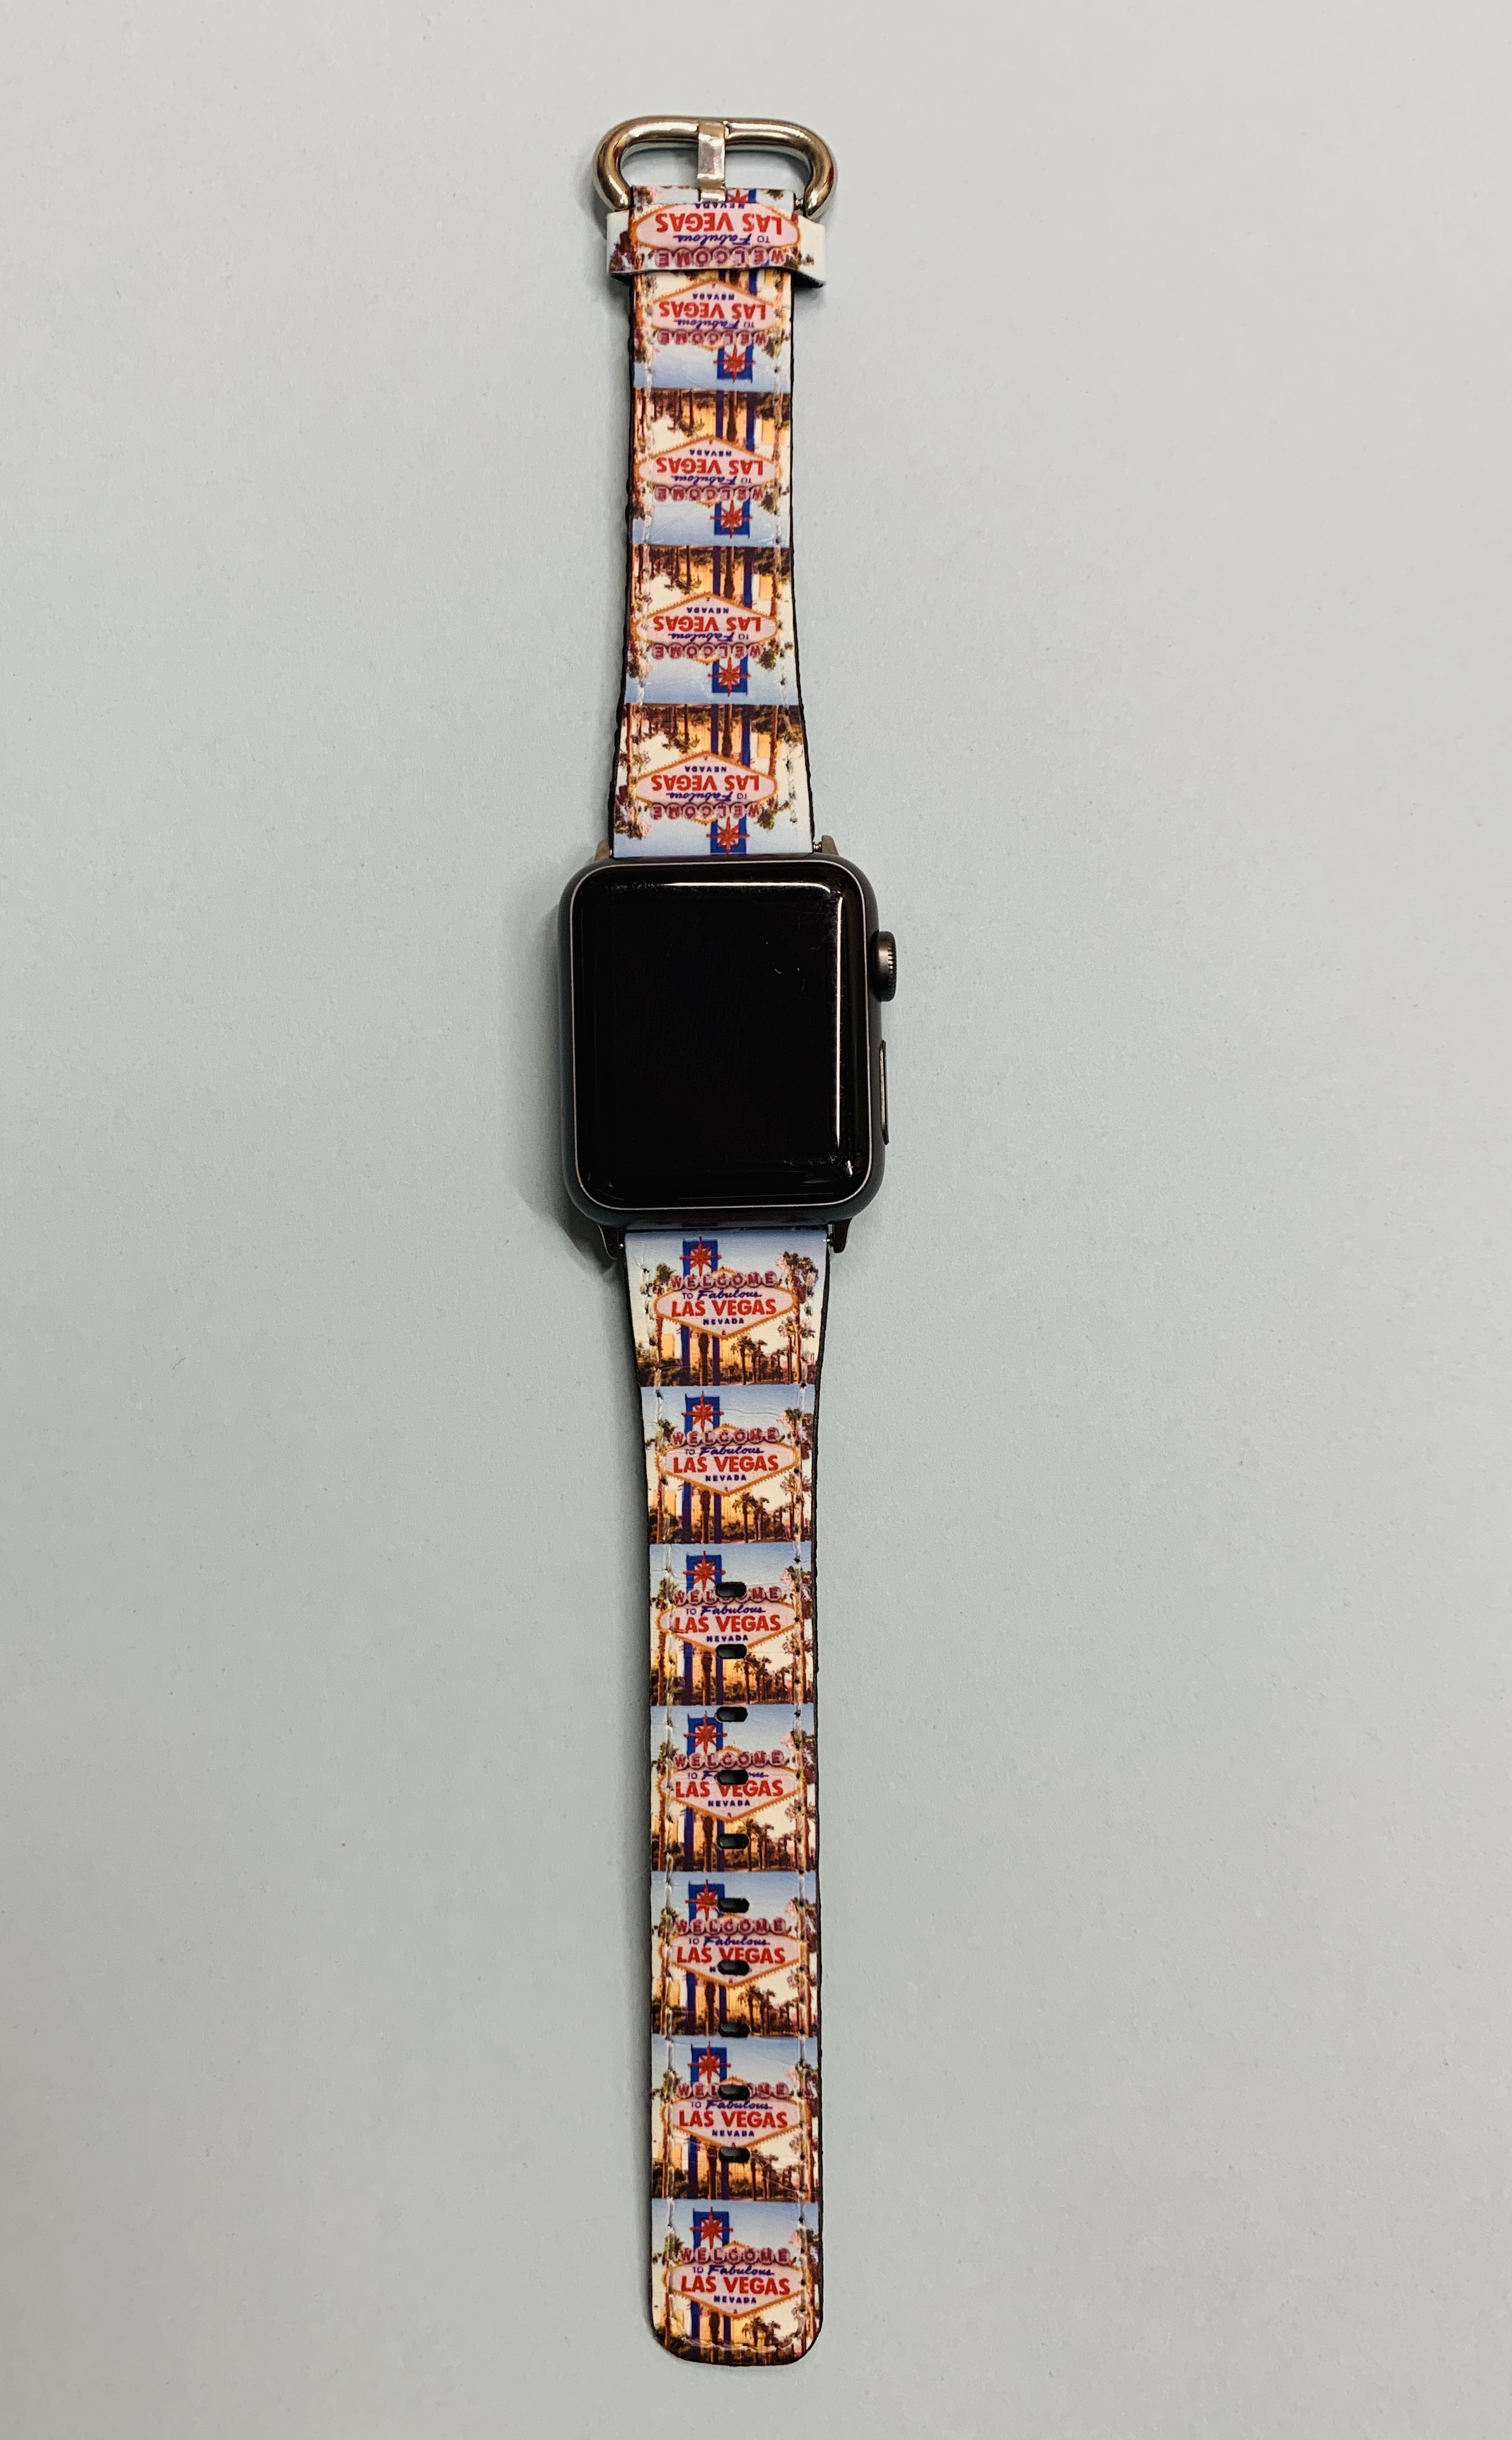 Las Vegas Apple Watch Band made with sublimation printing